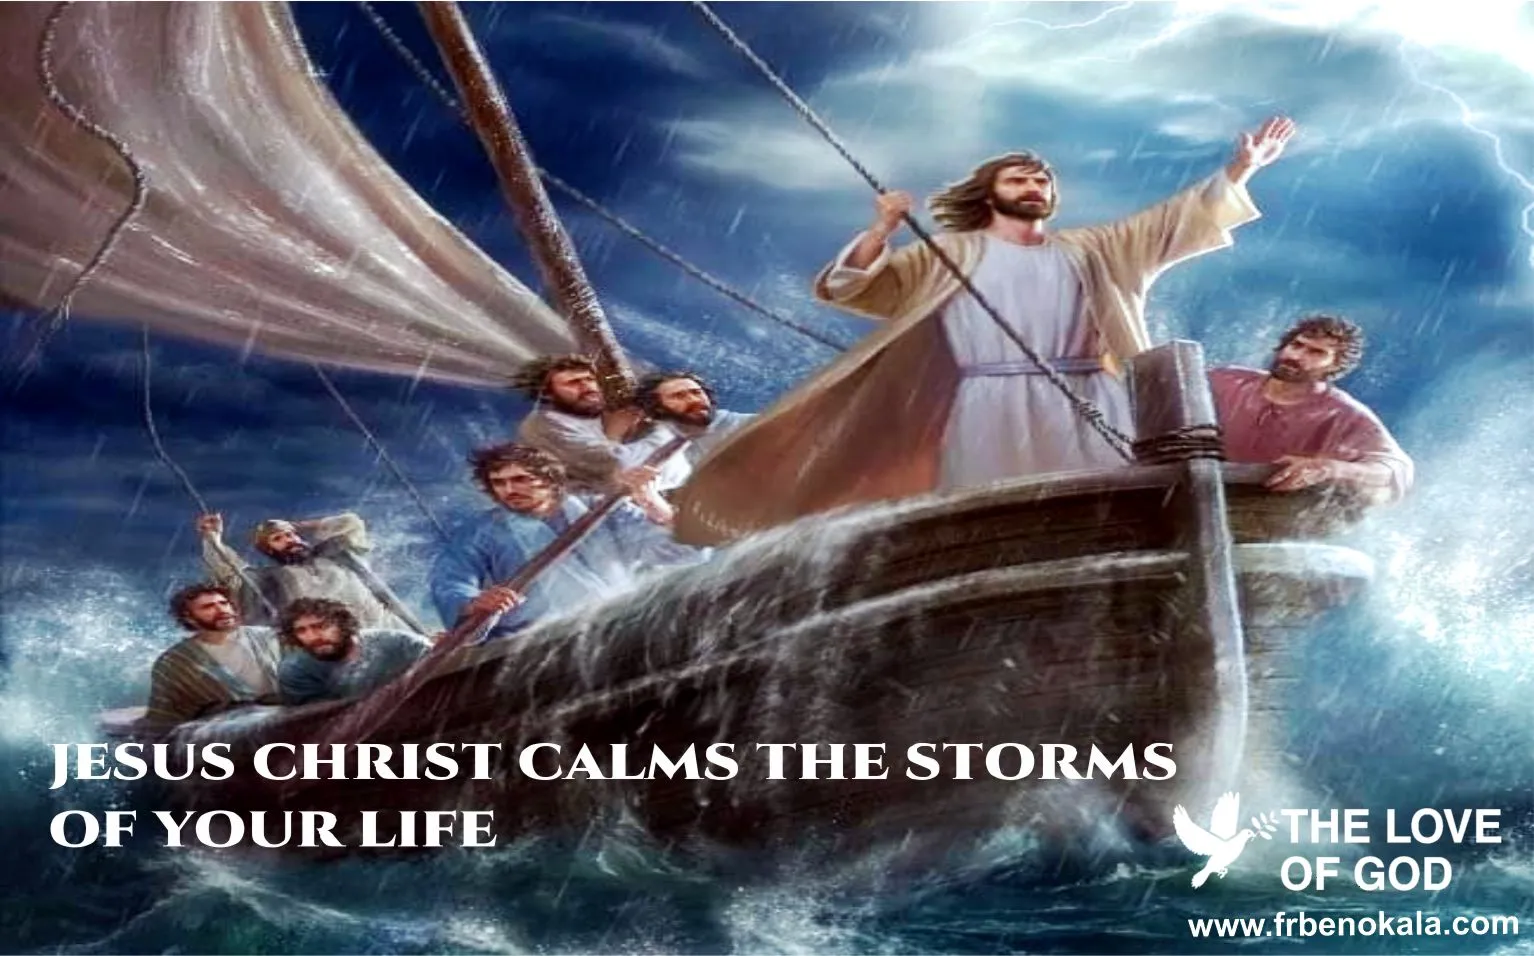 JESUS CHRIST CALMS THE STORMS OF YOUR LIFE